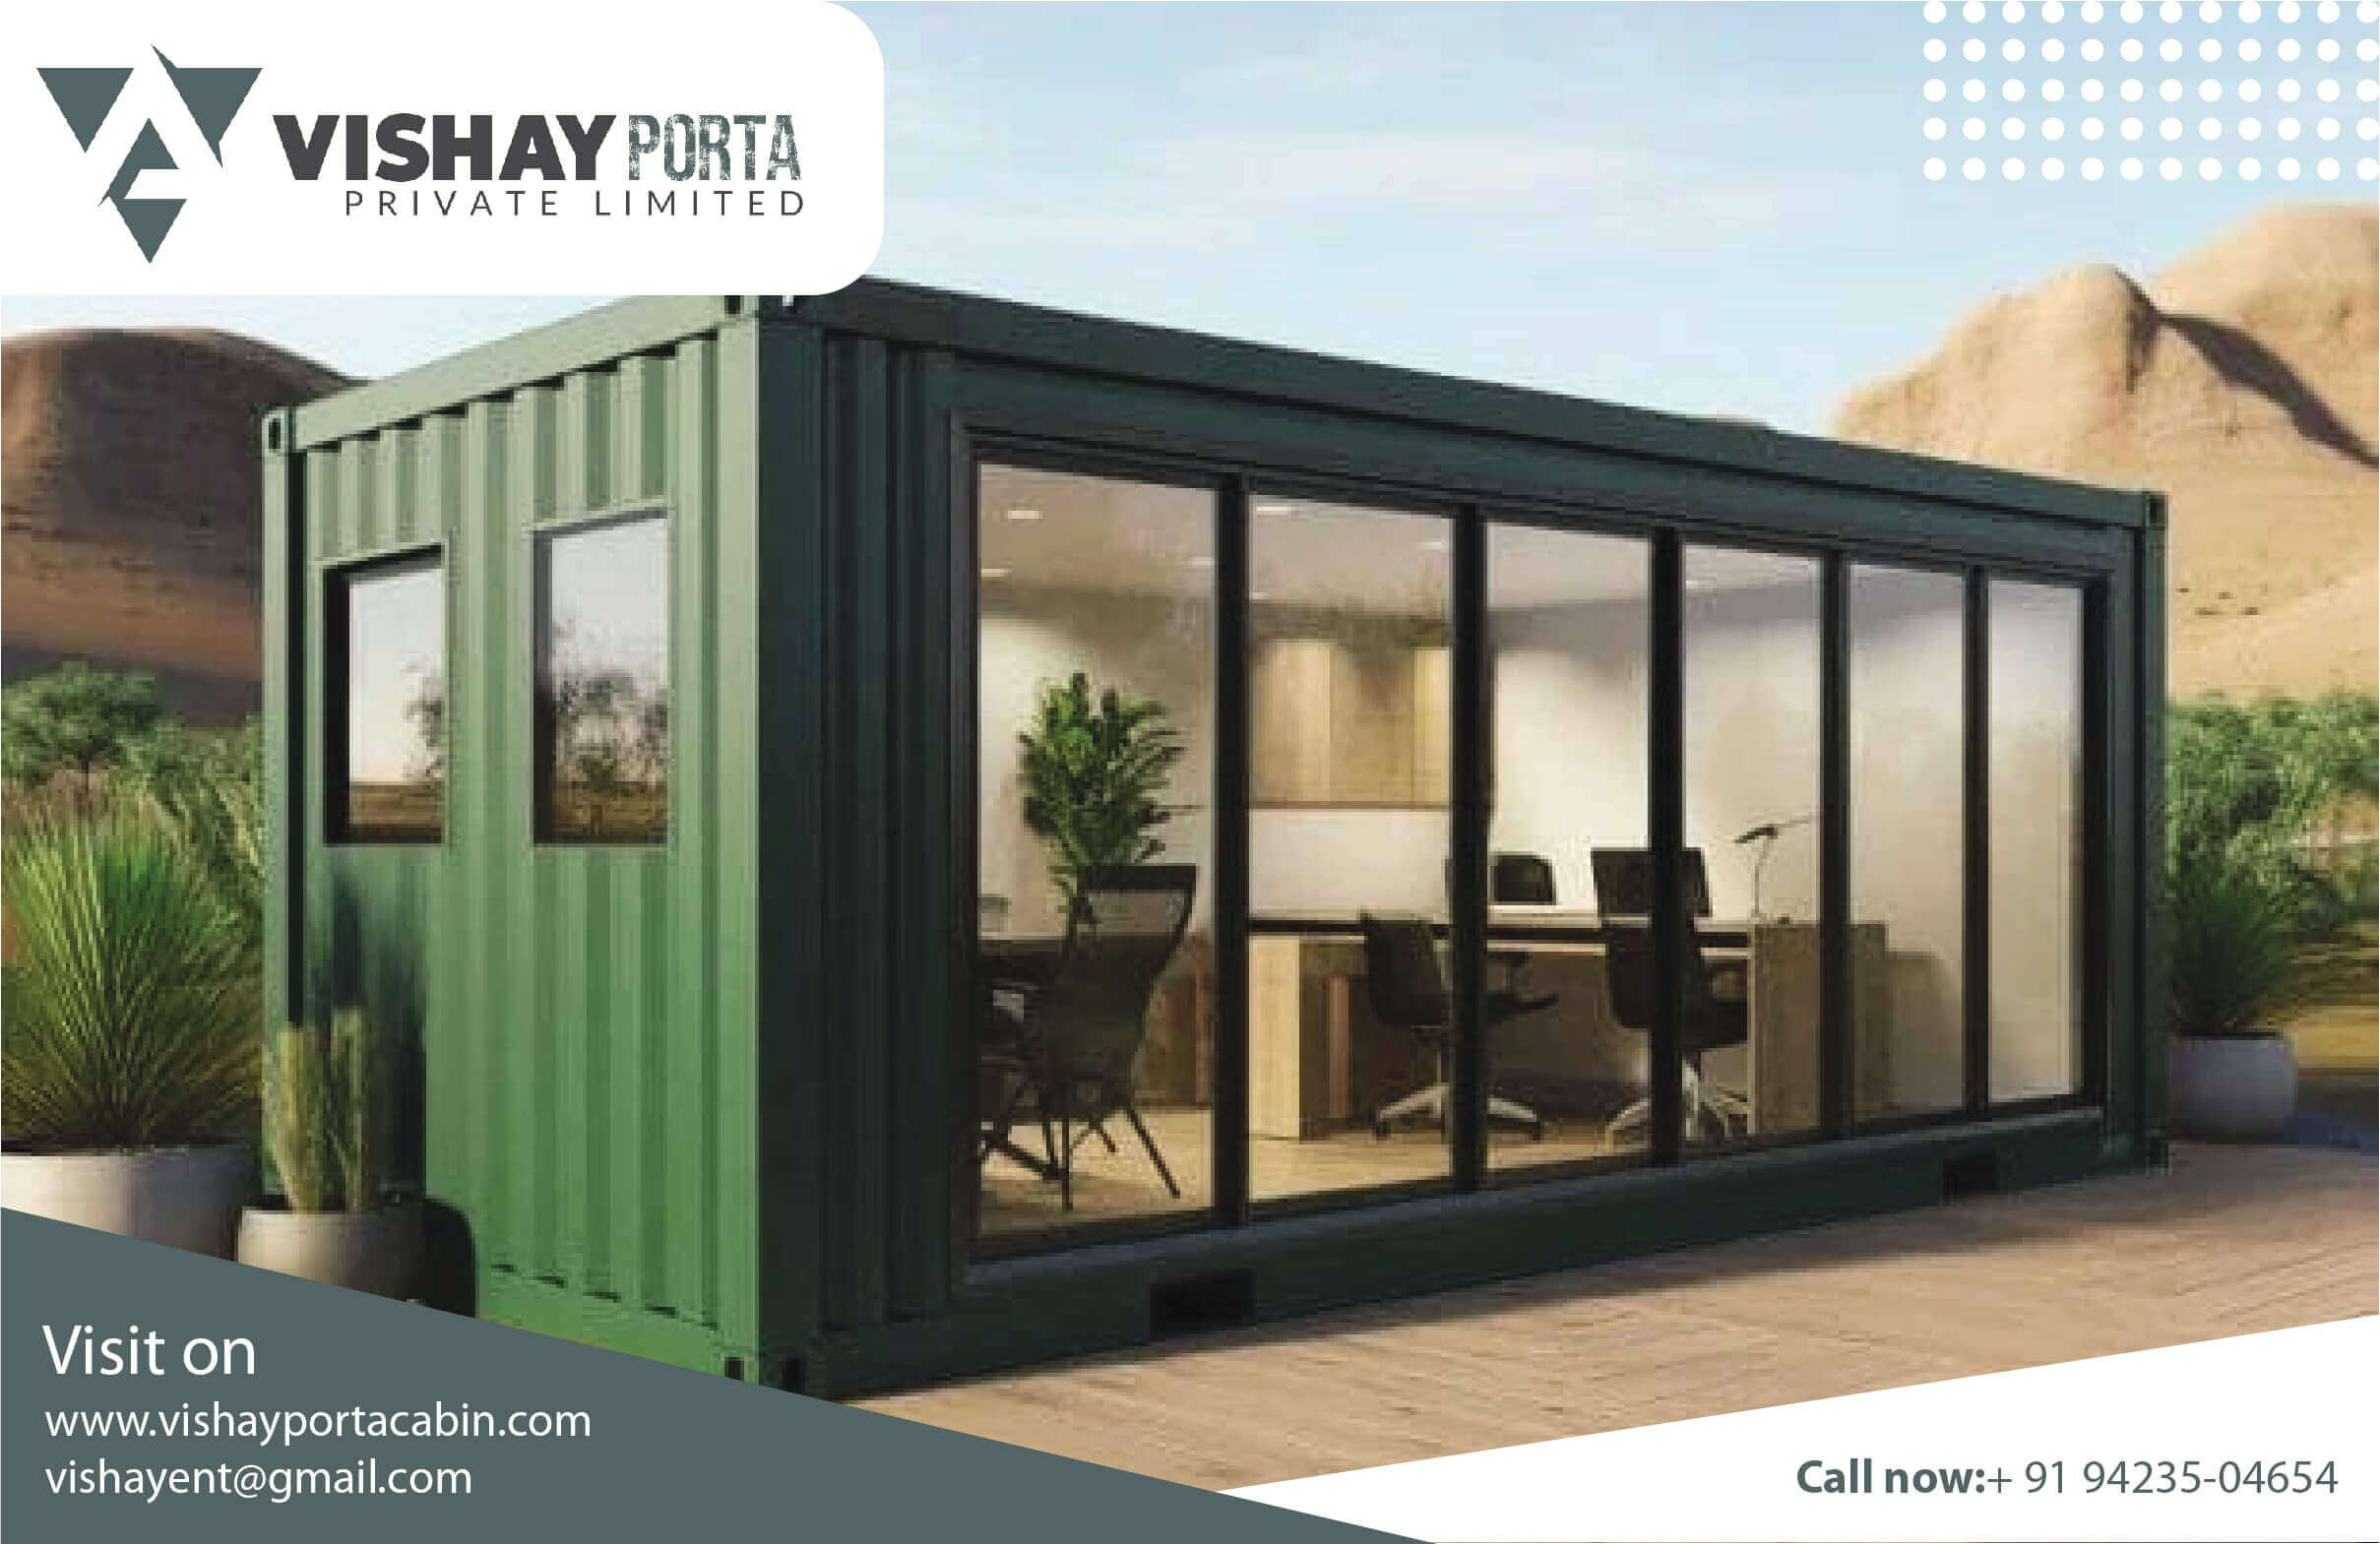 Vishay Porta Cabins: Your Trusted Partner for Quality Portable Cabins and Solutions